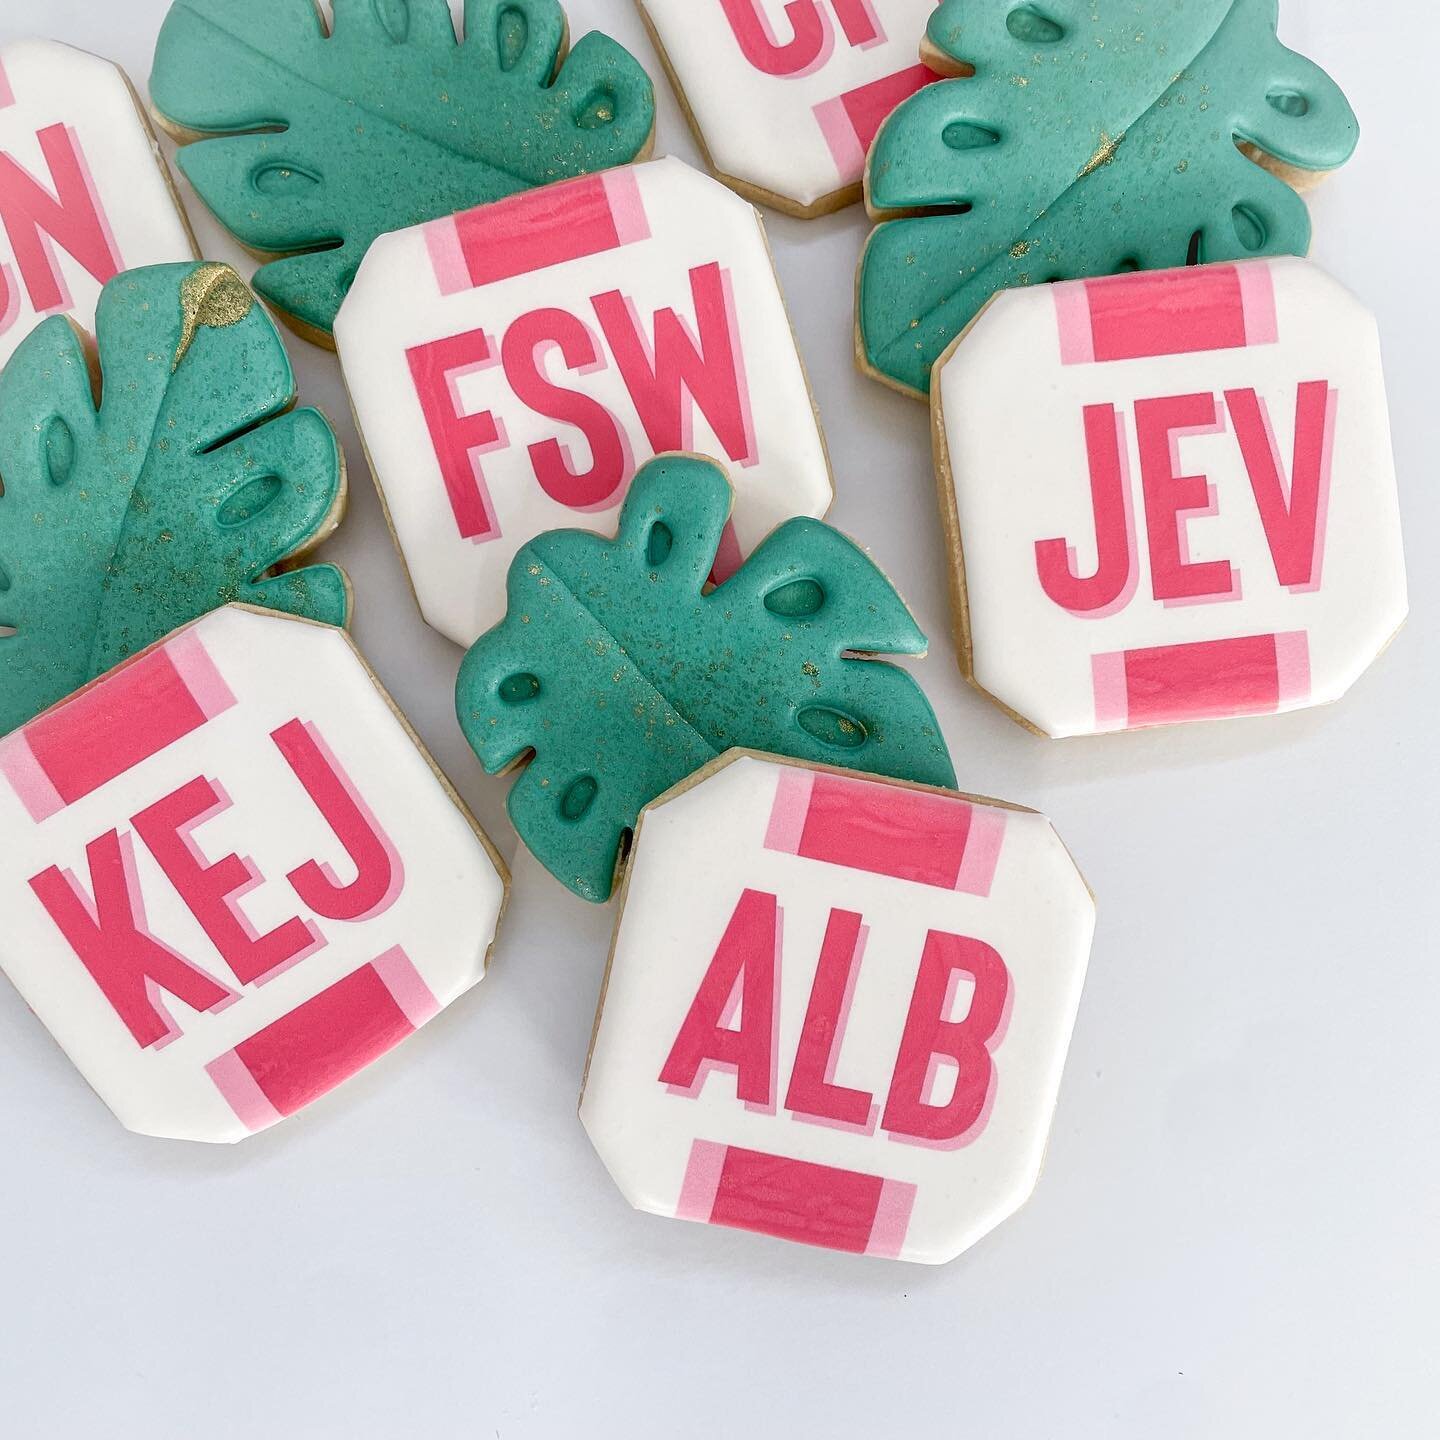 These lucky cookies are heading with a group of bridesmaids to warmer weather! 

#bachelorettecookies #monogramcookies #cookiesofinstagram